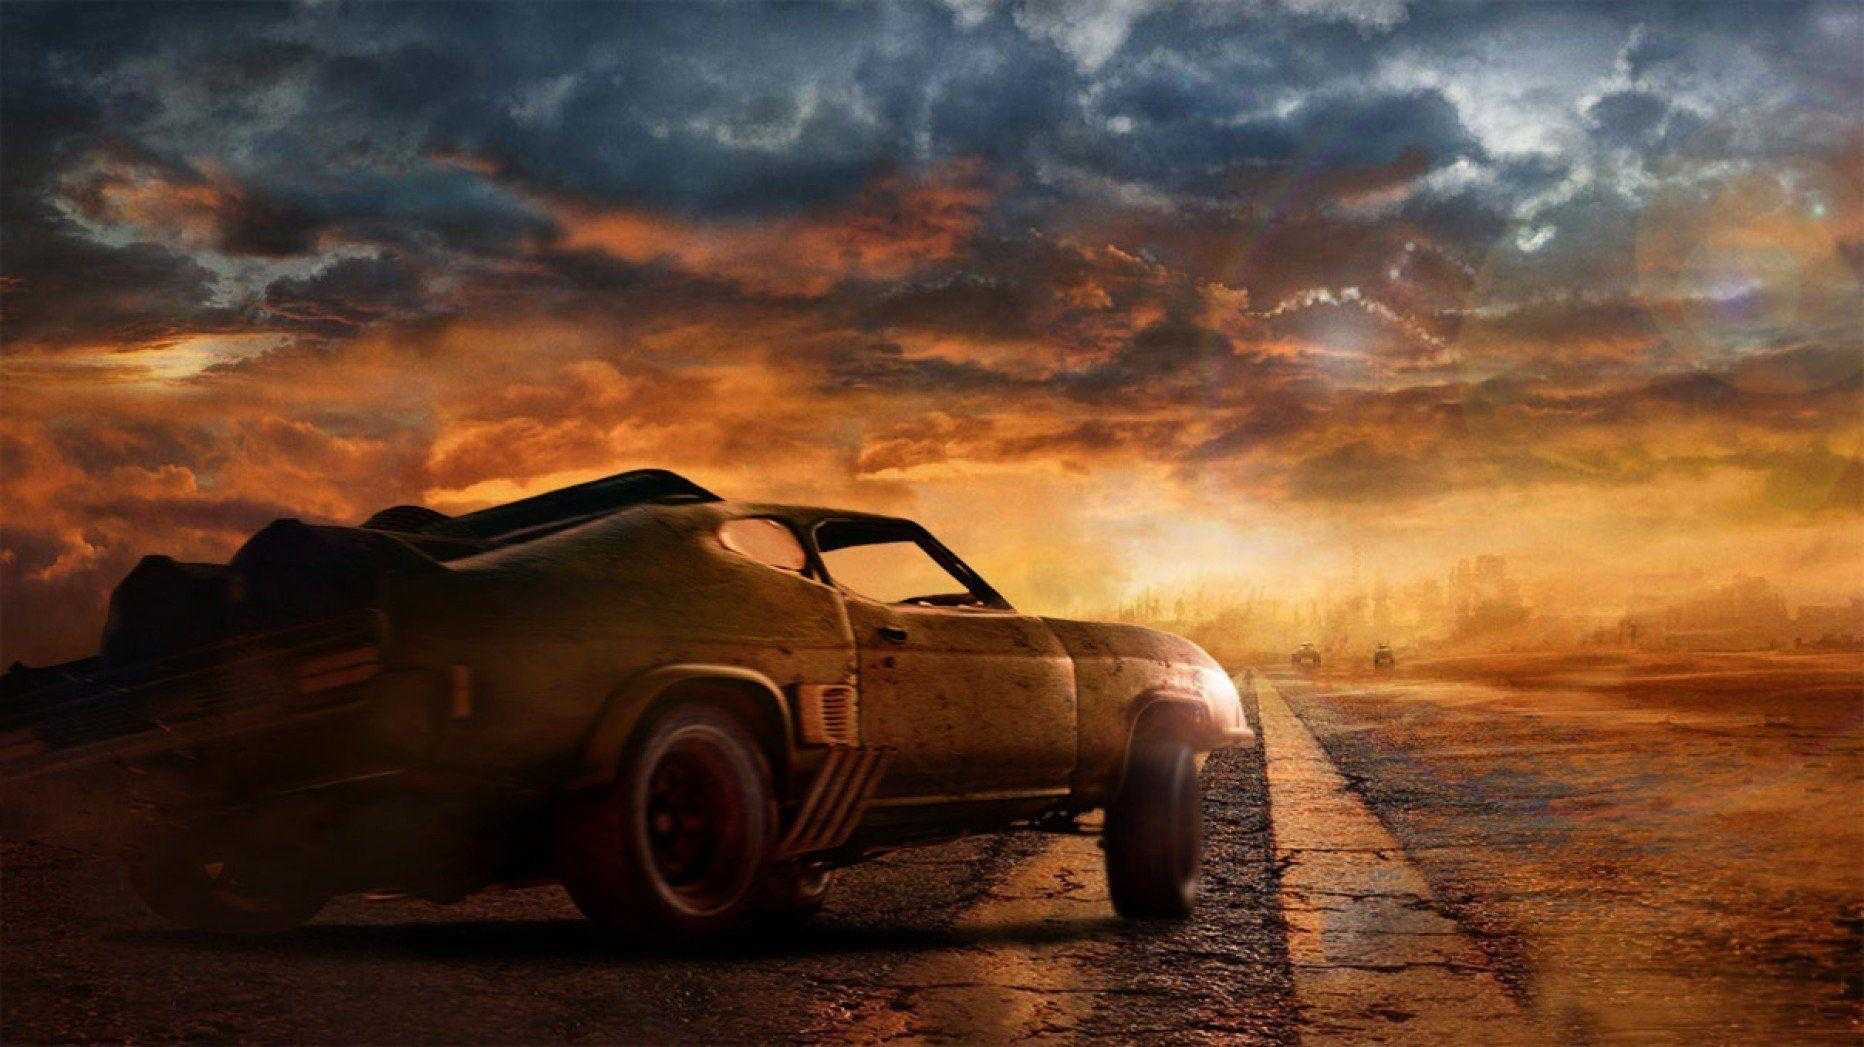  Mad  Max  4K  Wallpapers  Top Free Mad  Max  4K  Backgrounds  